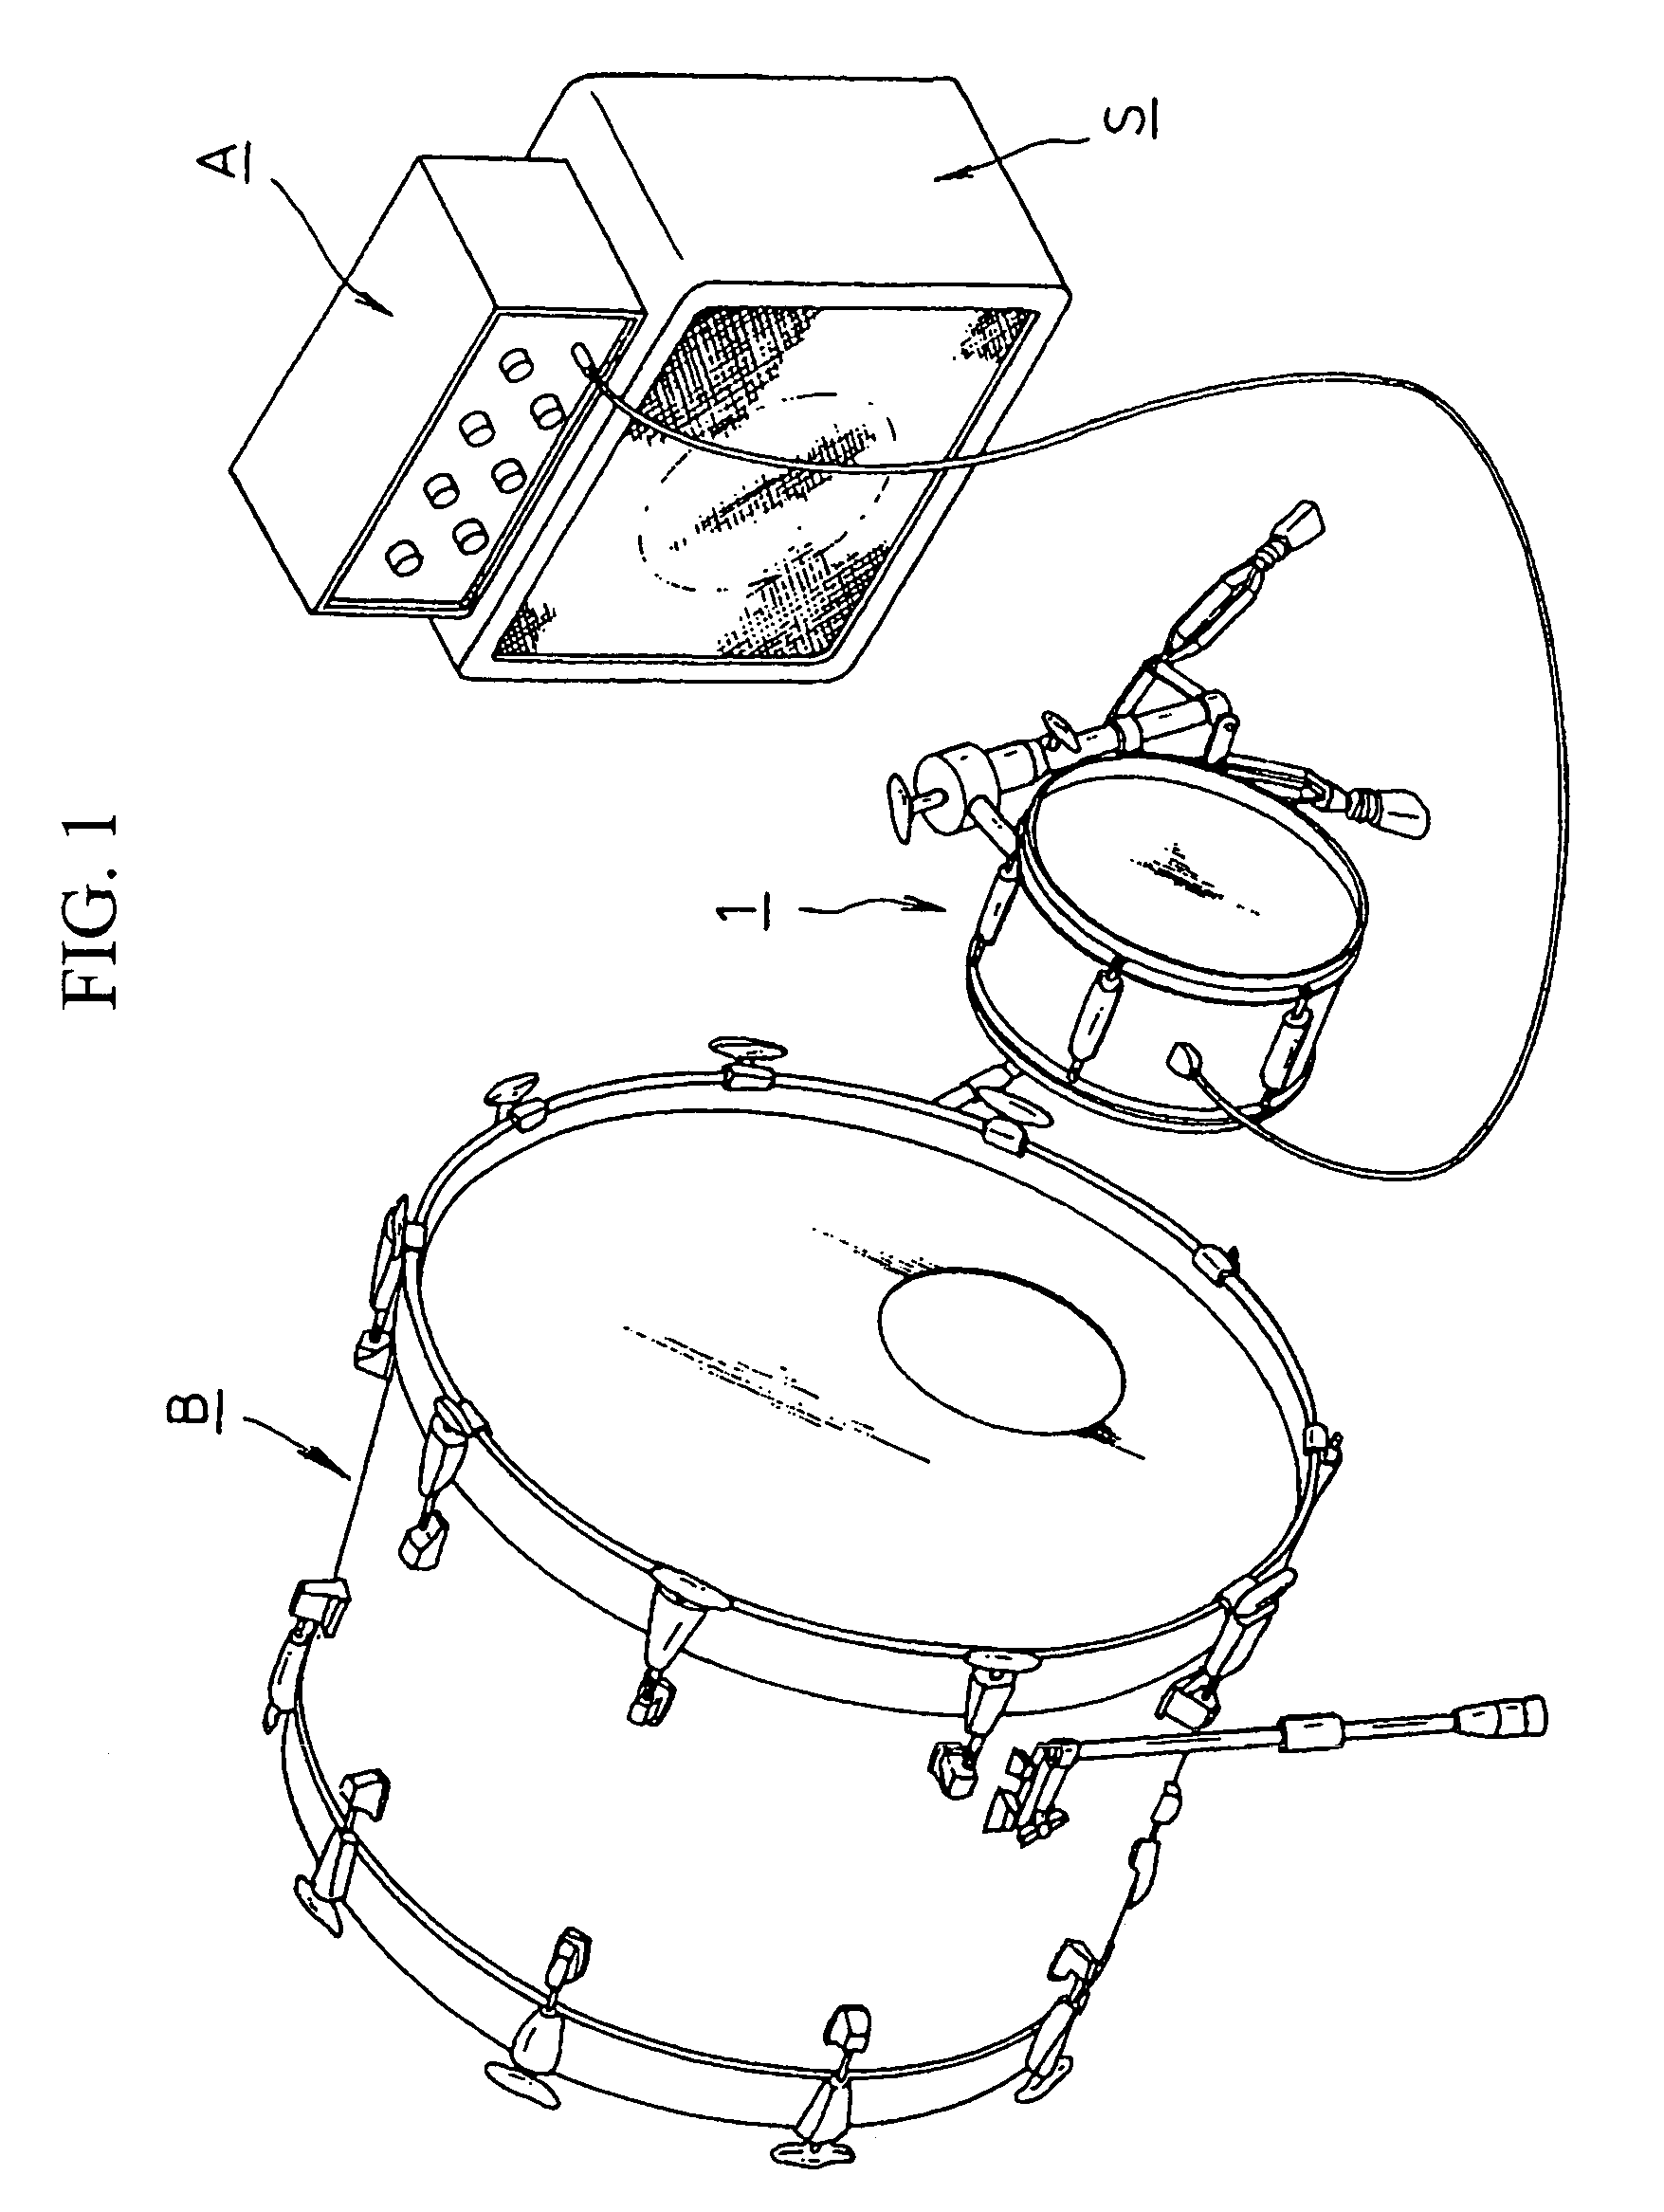 Sound pickup device for percussion instrument